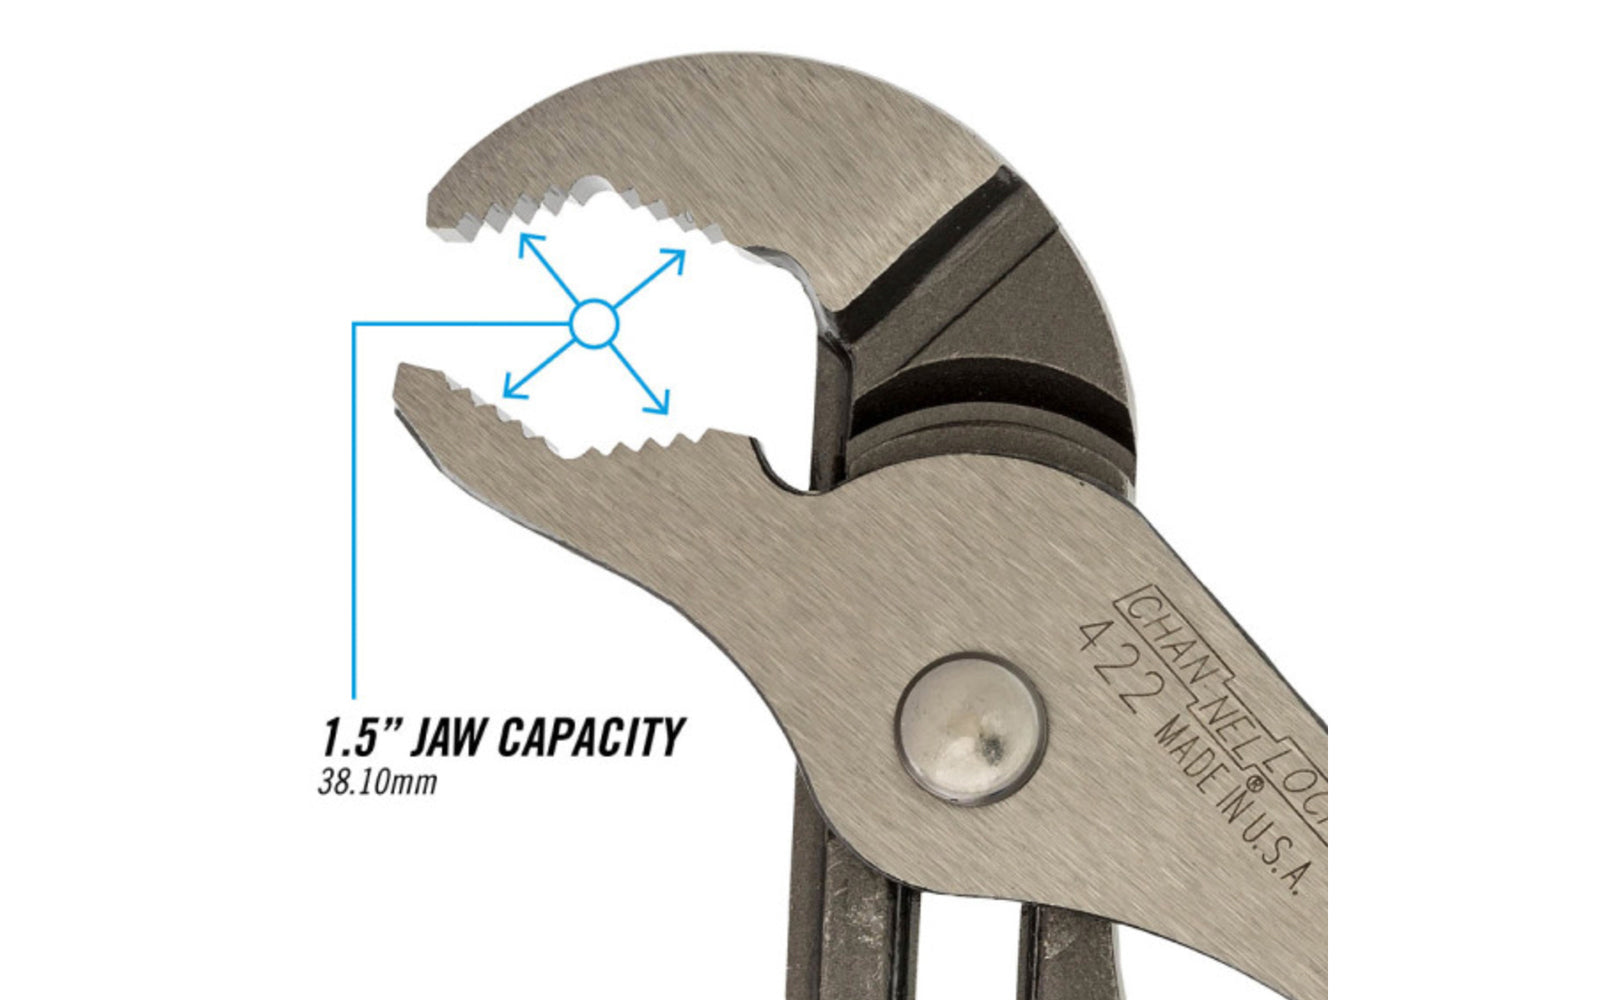 Channellock 9-1/2" V-Jaw Tongue & Groove Plier has a unique v jaw design that creates more points of contact on round stock & tubing. Laser-hardened teeth to provide a better, longer lasting grip. Channelock Model 422. Professional non-slip channellocks. adjustable 9.5" tongue and groove plier. Made in USA.